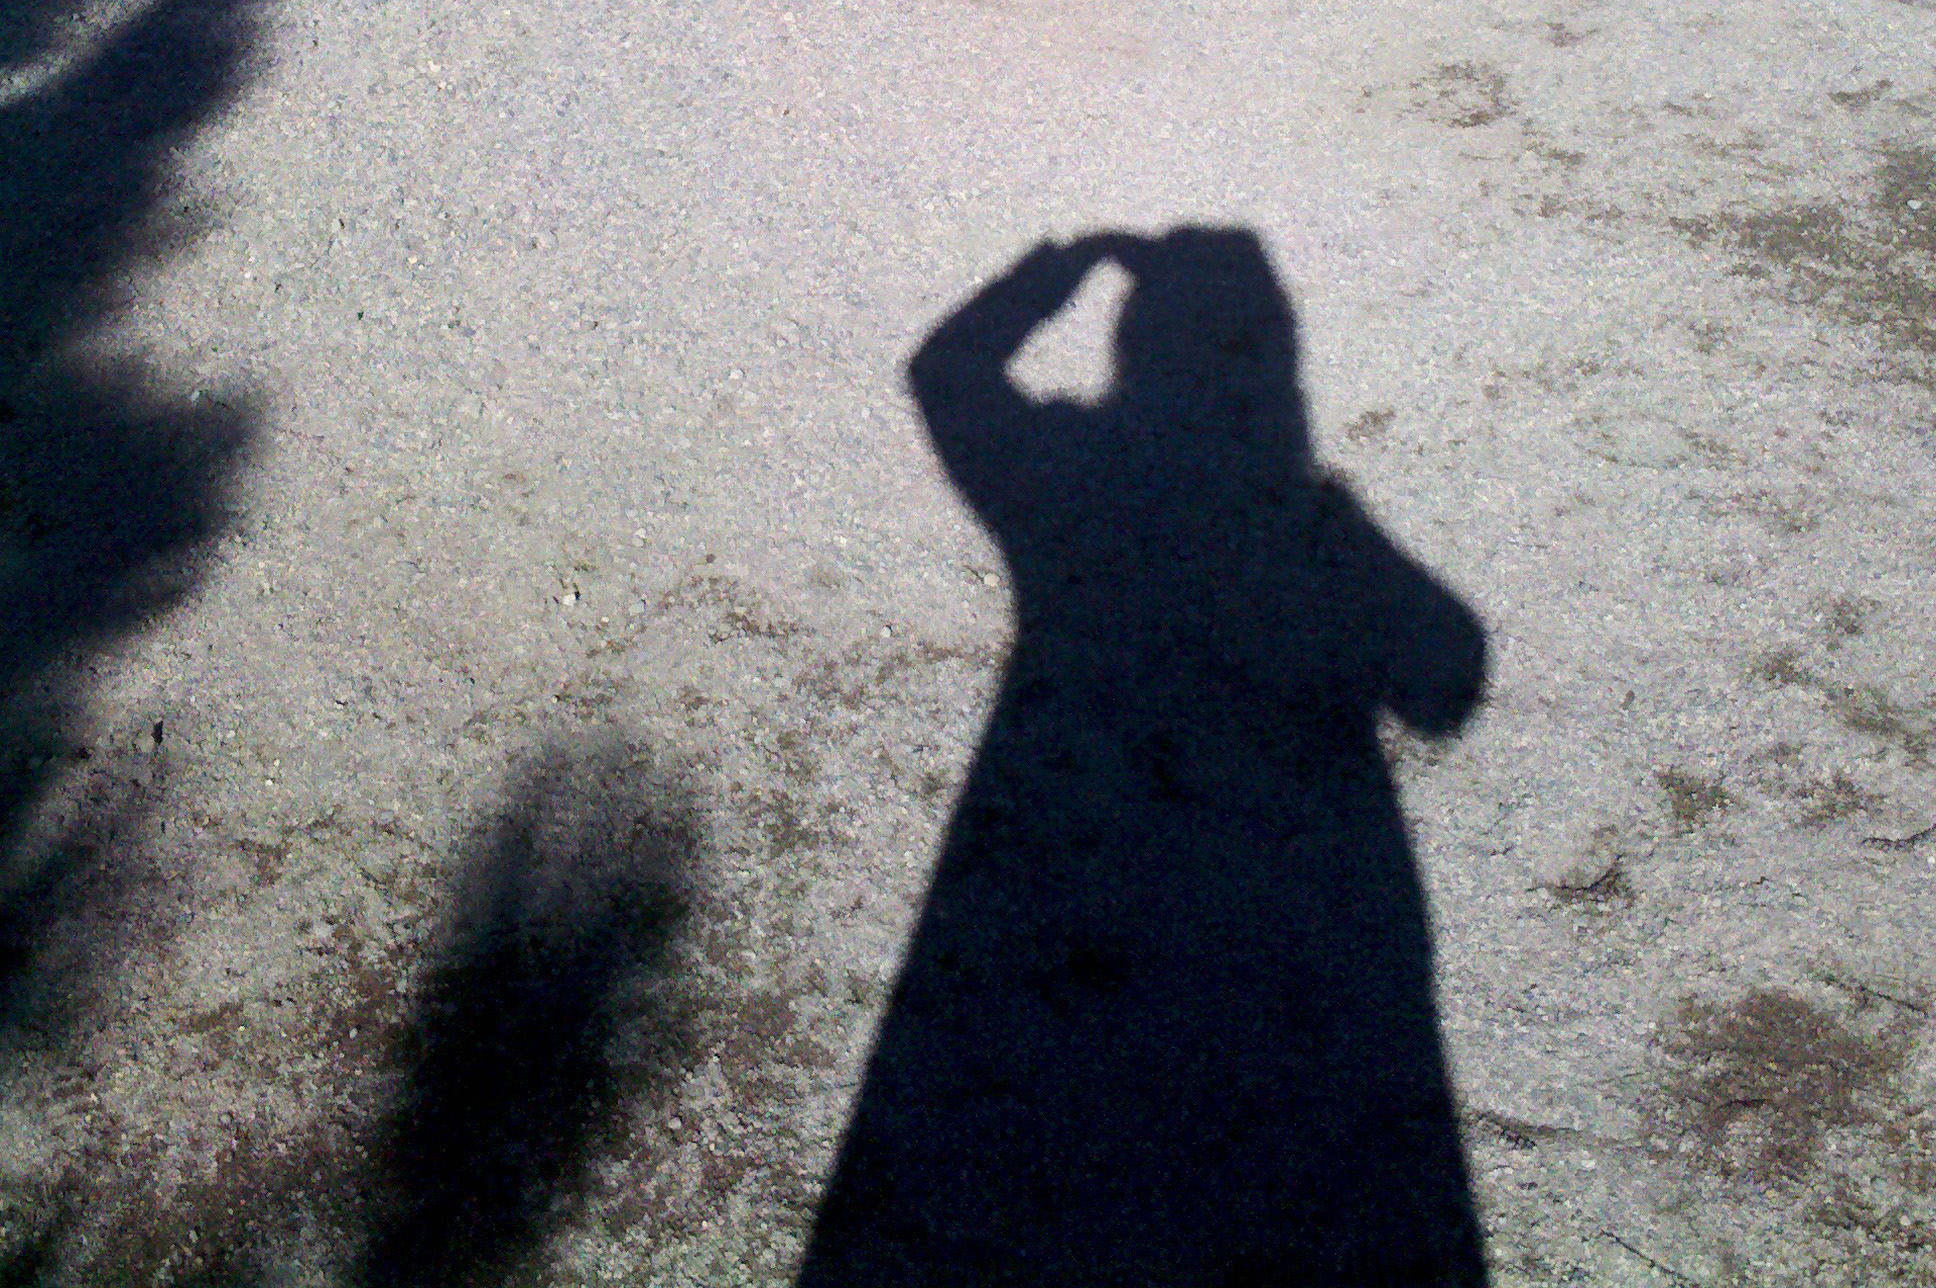 a photo of the writer's shadow